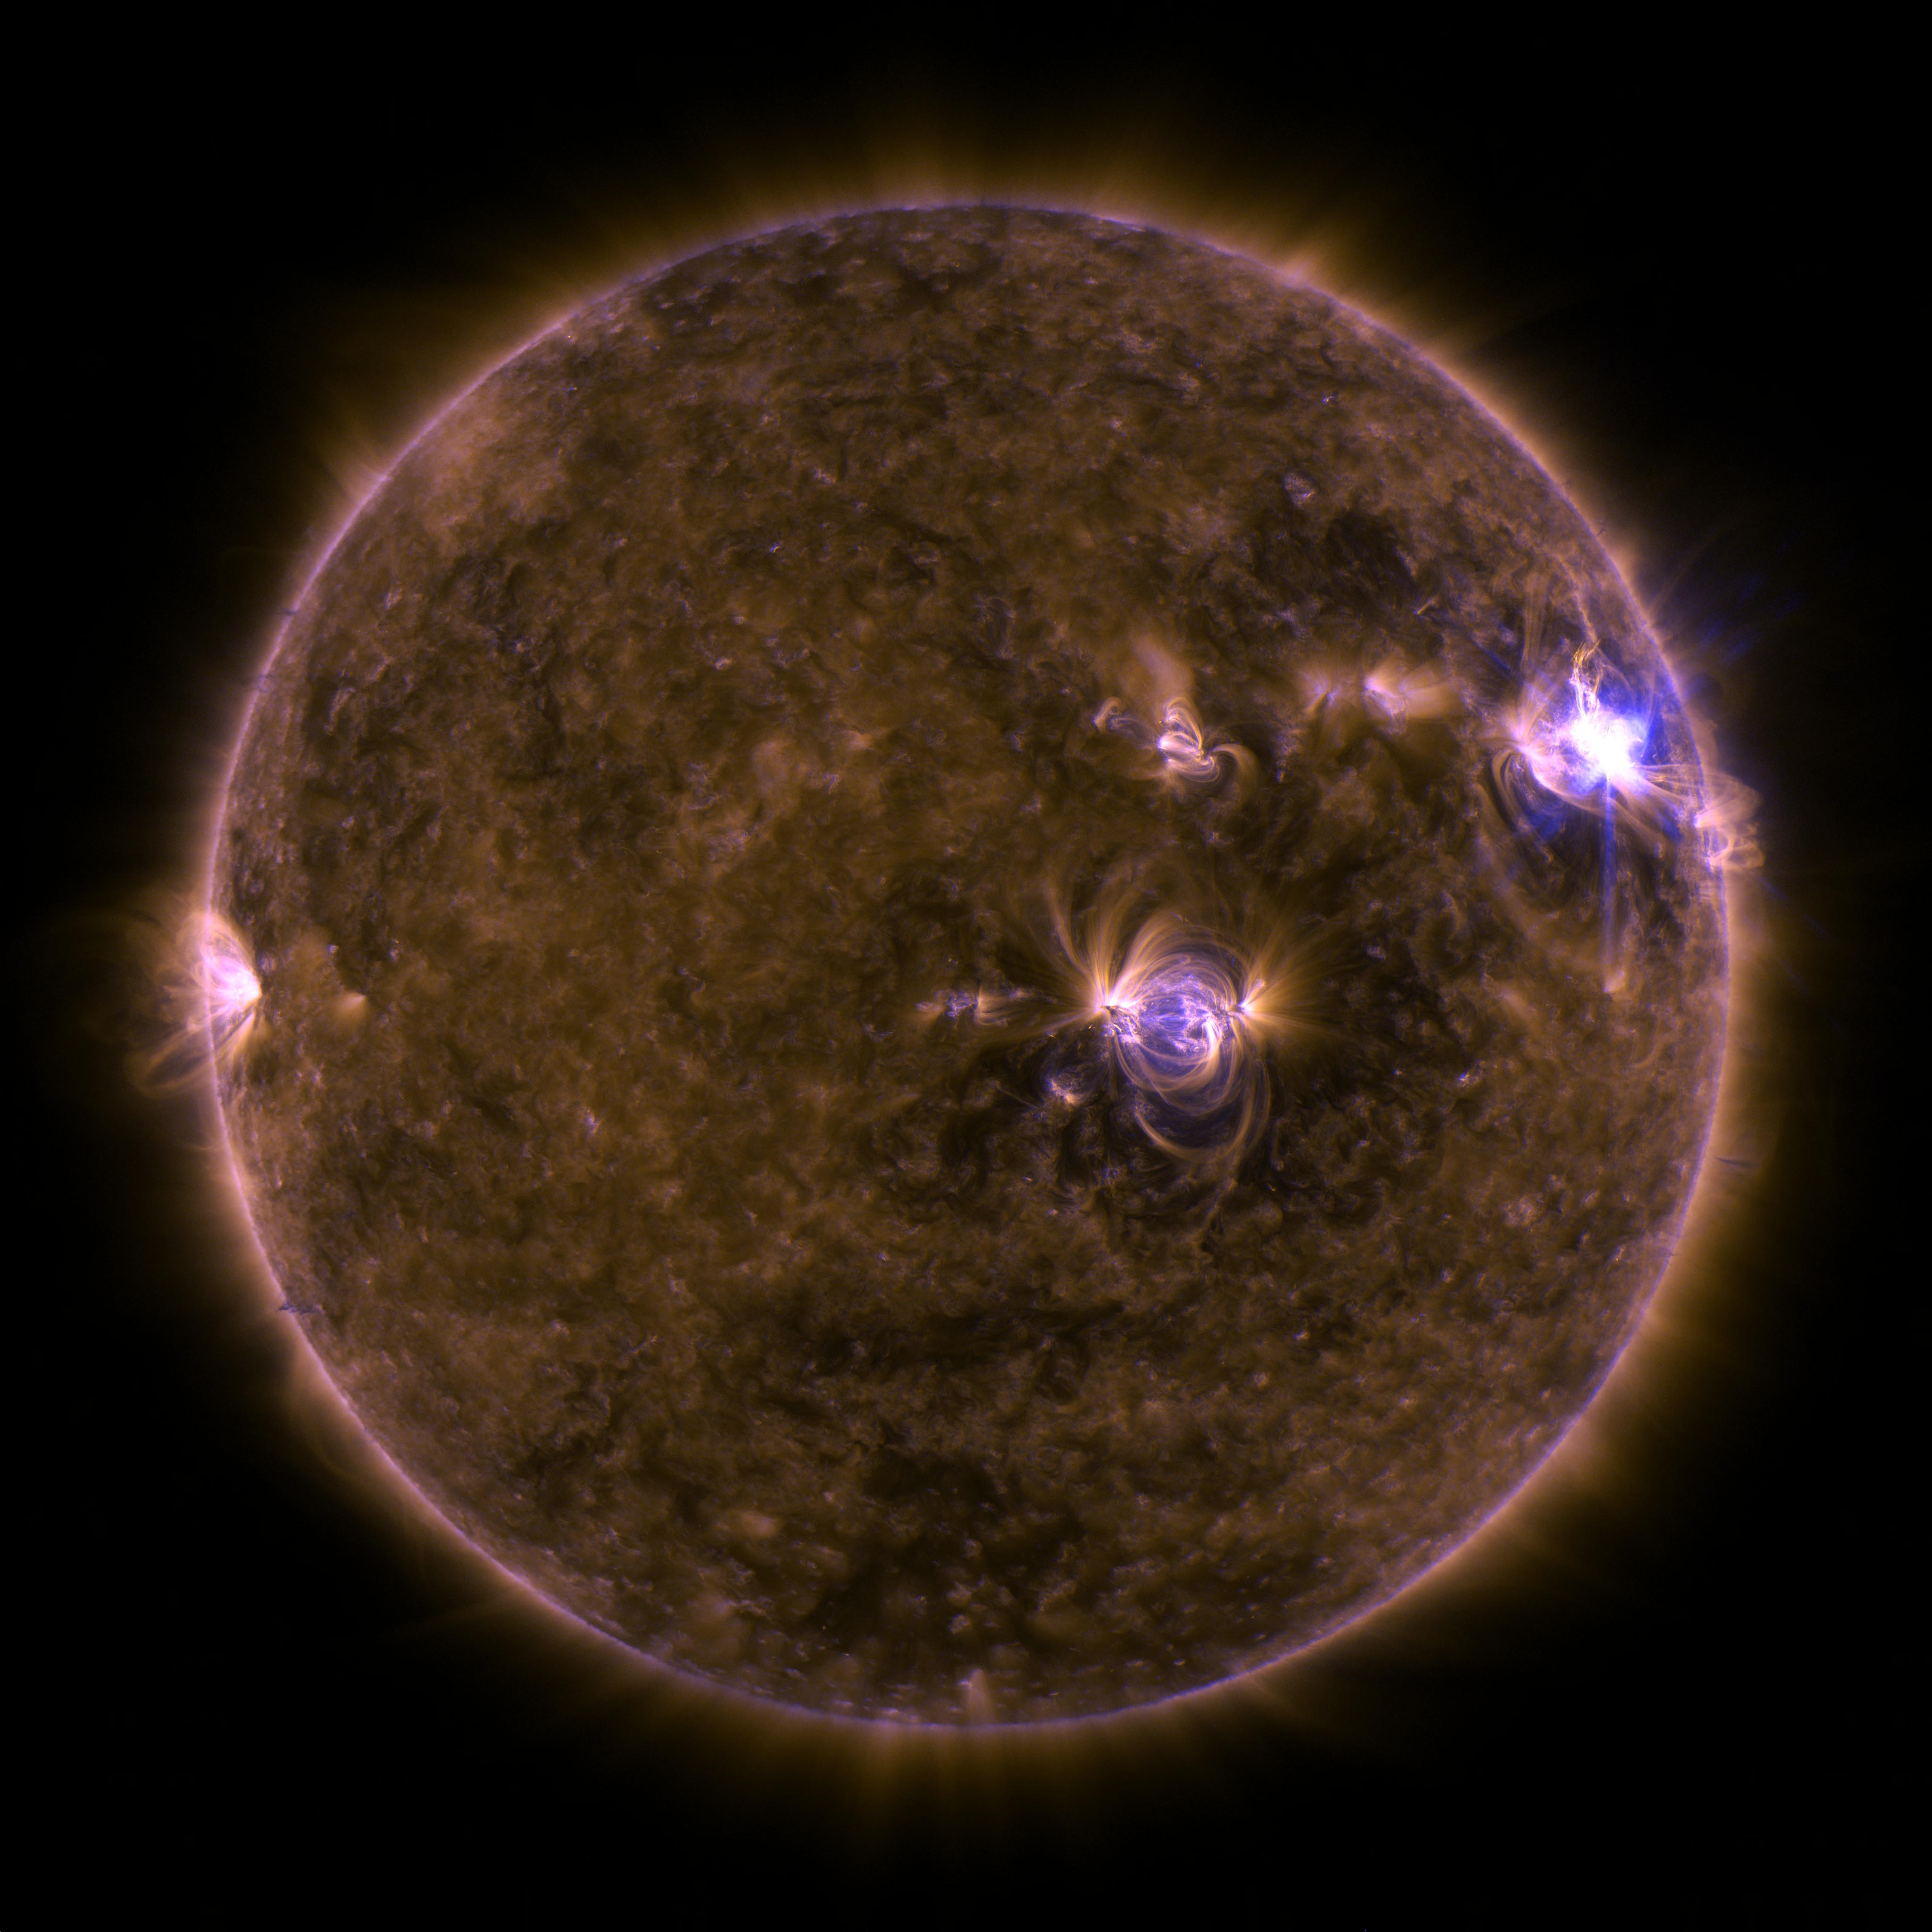 Image of M5.3 solar flare on April 2, 2017 as seen by NASA's Solar Dynamics Observatory in a blend of 131 and 171 angstroms. Credit: NASA/SDO